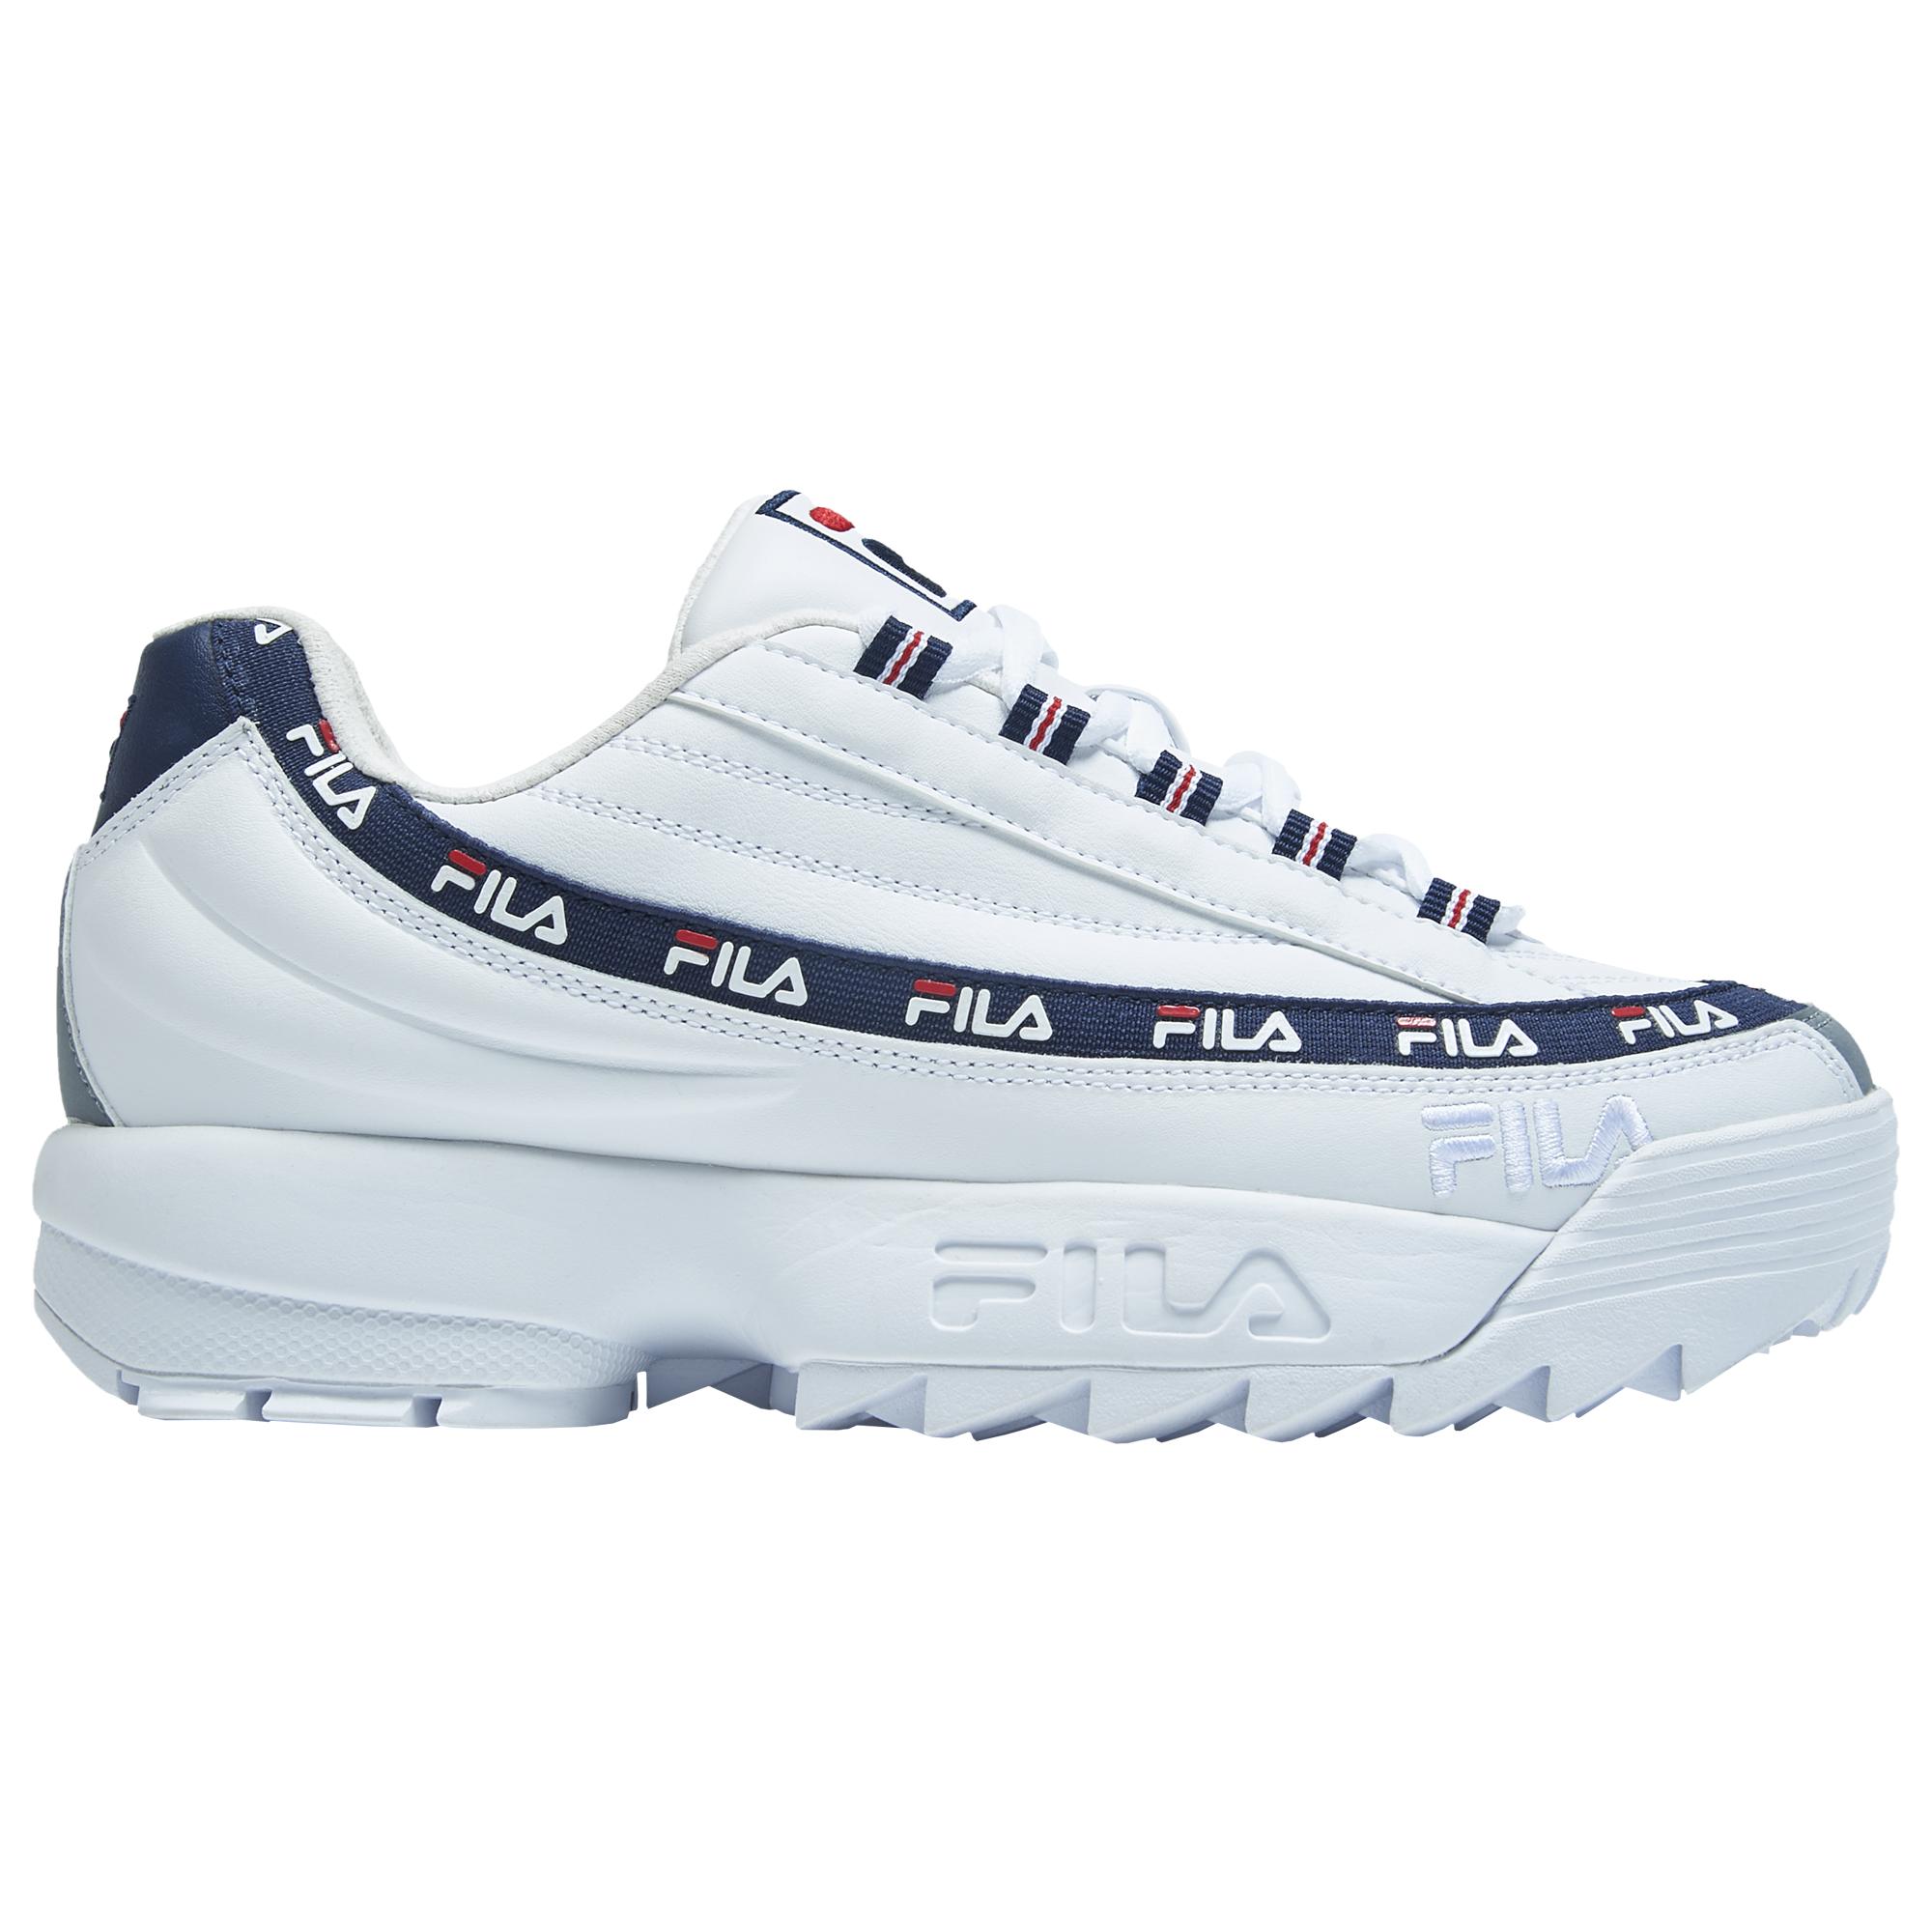 Fila Suede Dragster 98 X Disruptor Ii Training Shoes in White/Navy Red ...